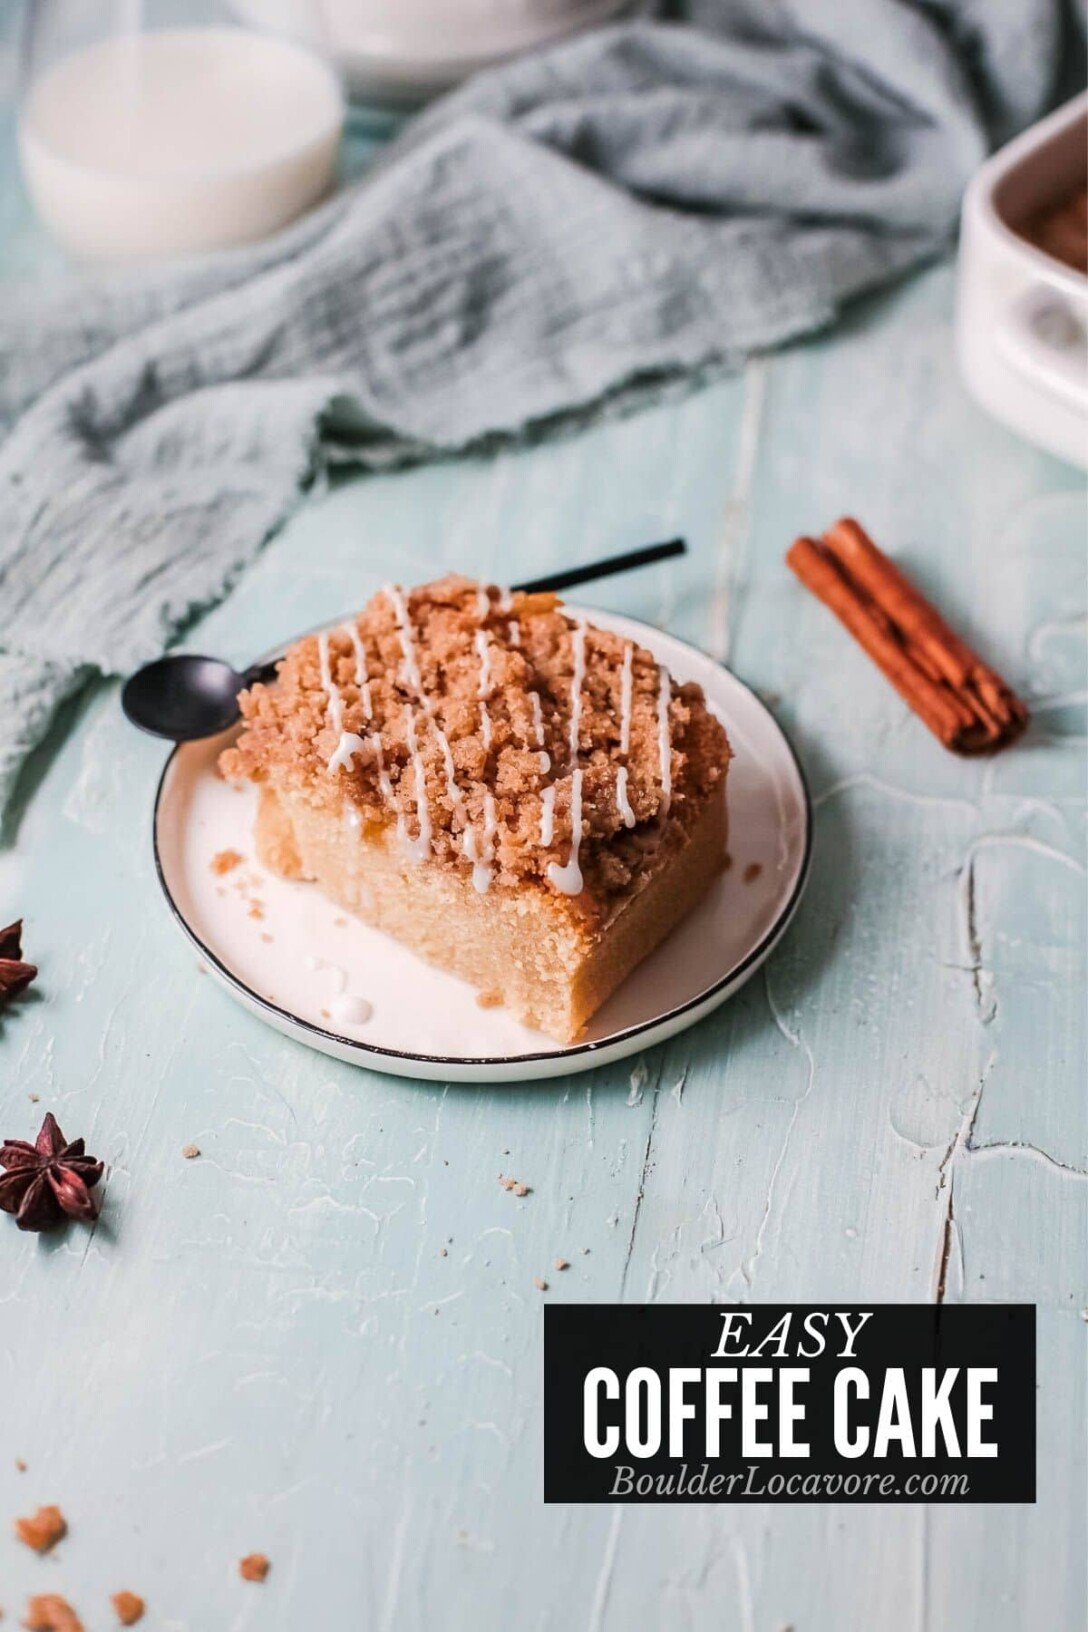 EASY COFFEE CAKE TITLE